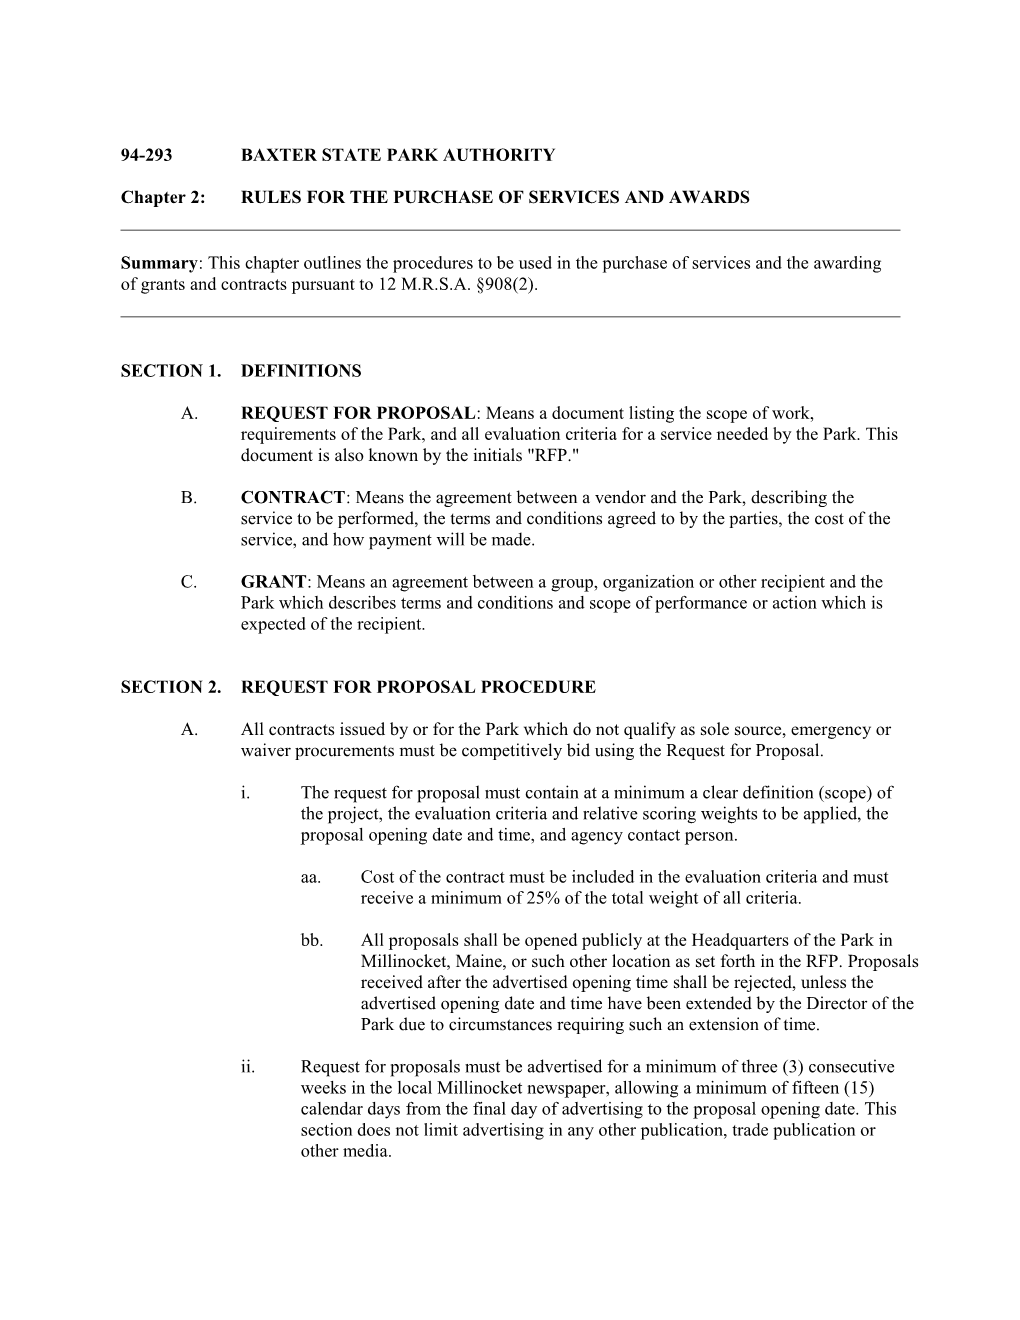 Chapter 2:RULES for the PURCHASE of SERVICES and AWARDS